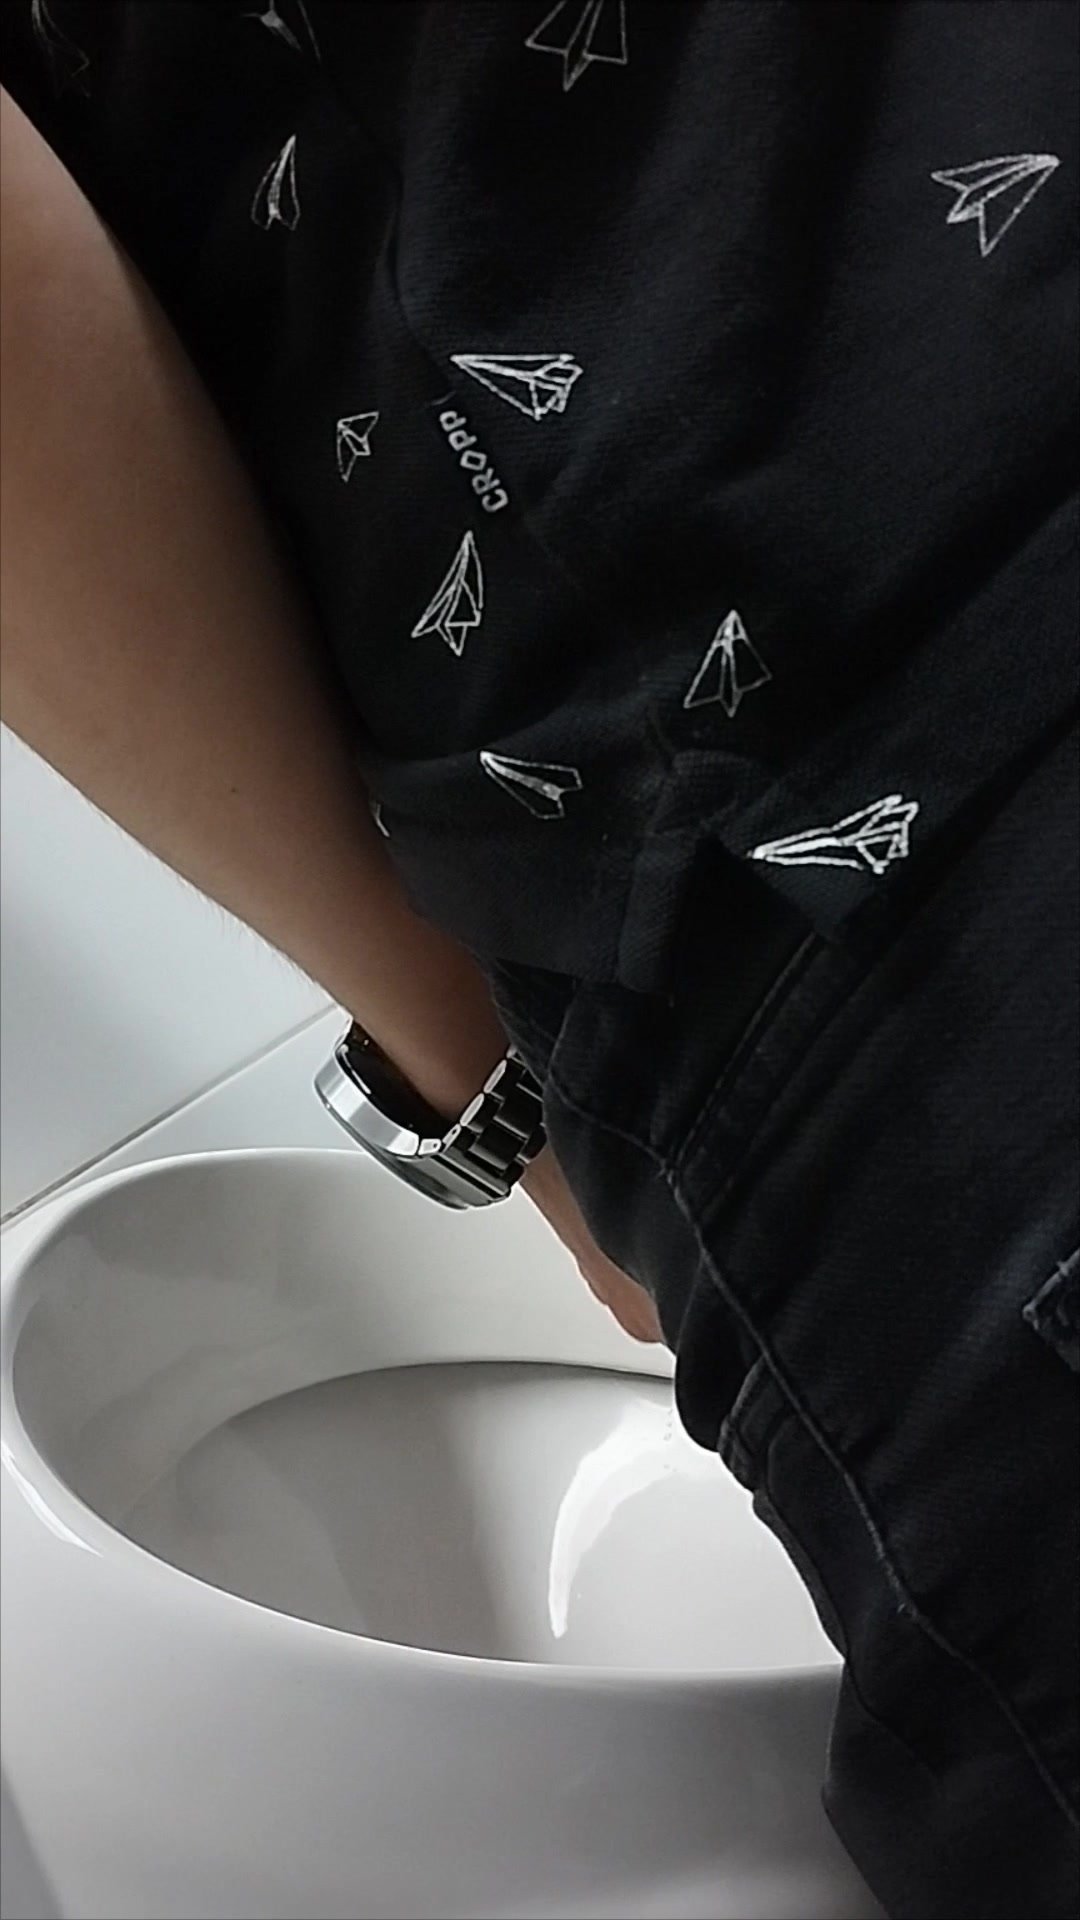 Two guys pissing at the urinals